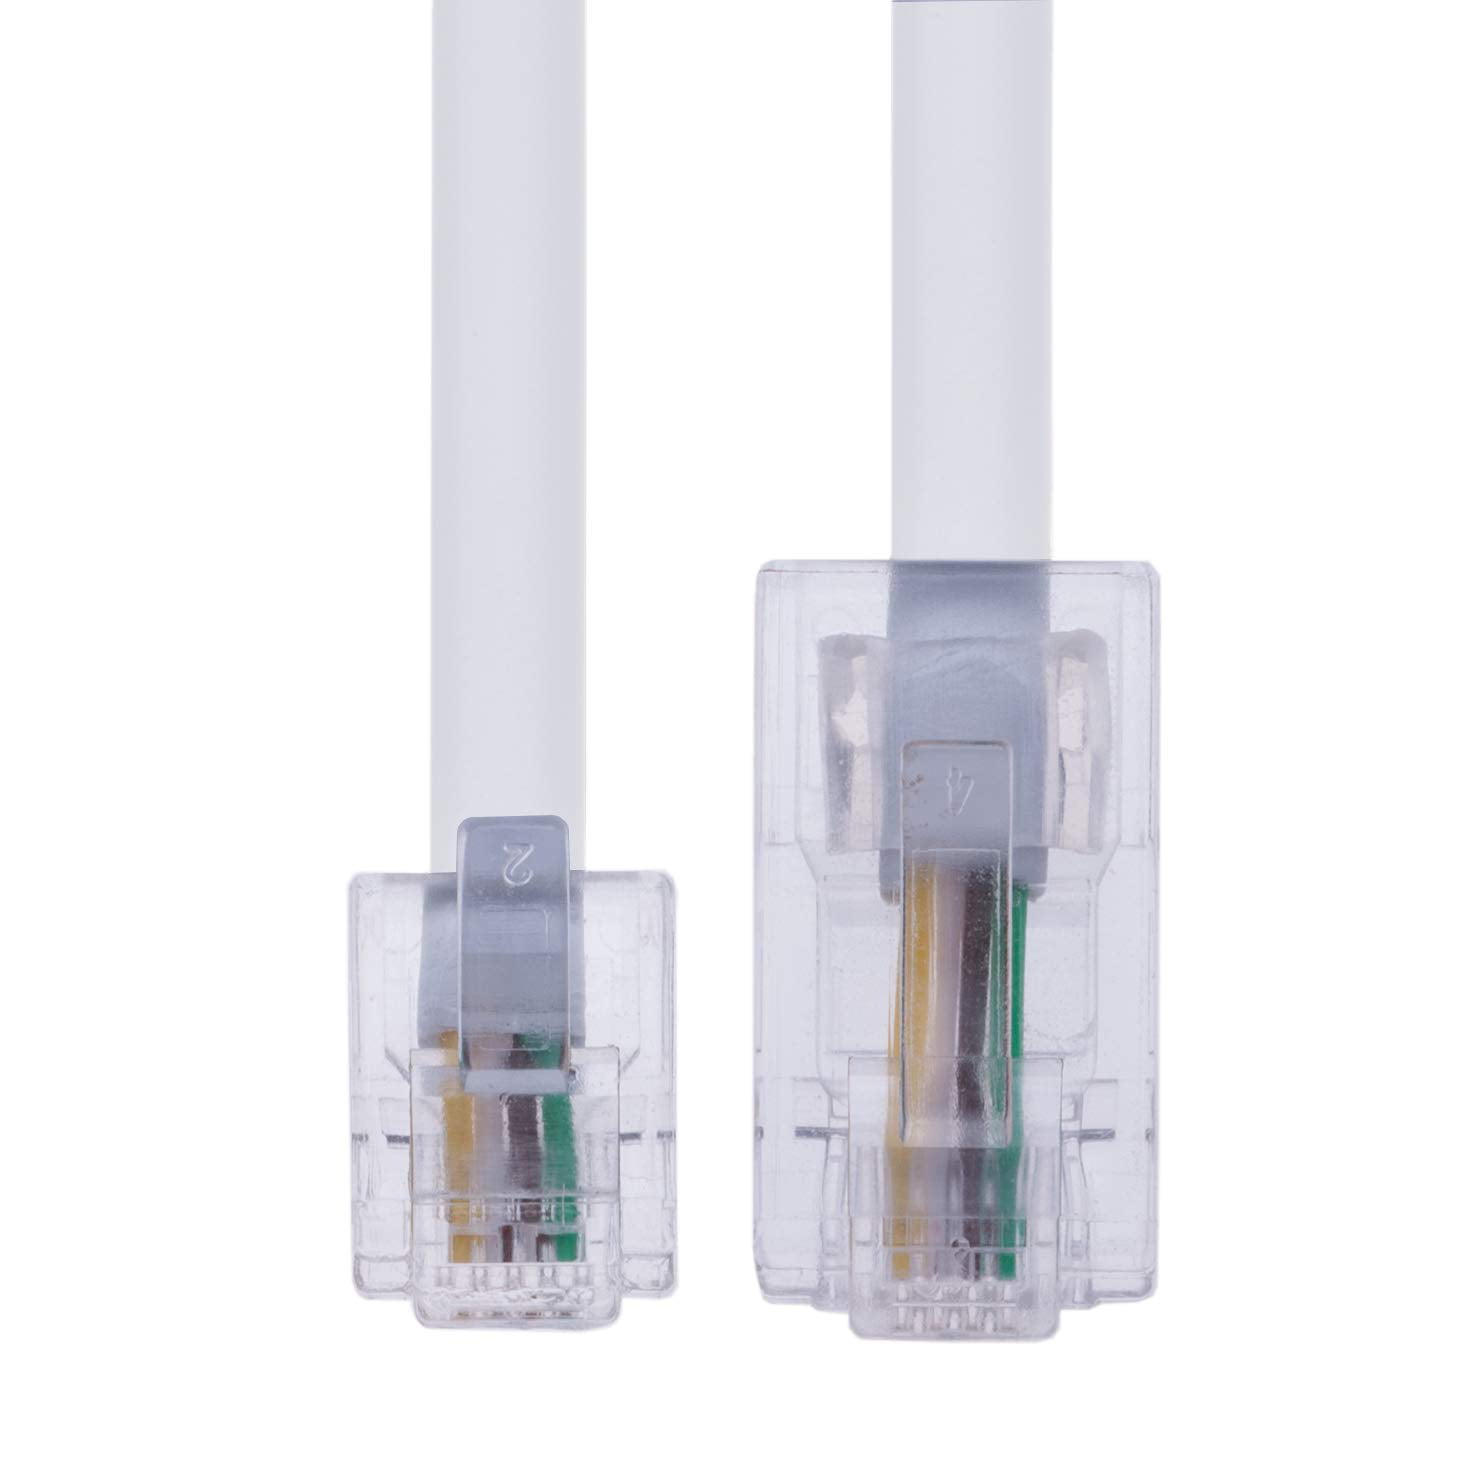 2 Pack Telephone Cord RJ11 6P4C to RJ45 8P8C Connector Plug Cable for Landline Telephone 3 Meter 